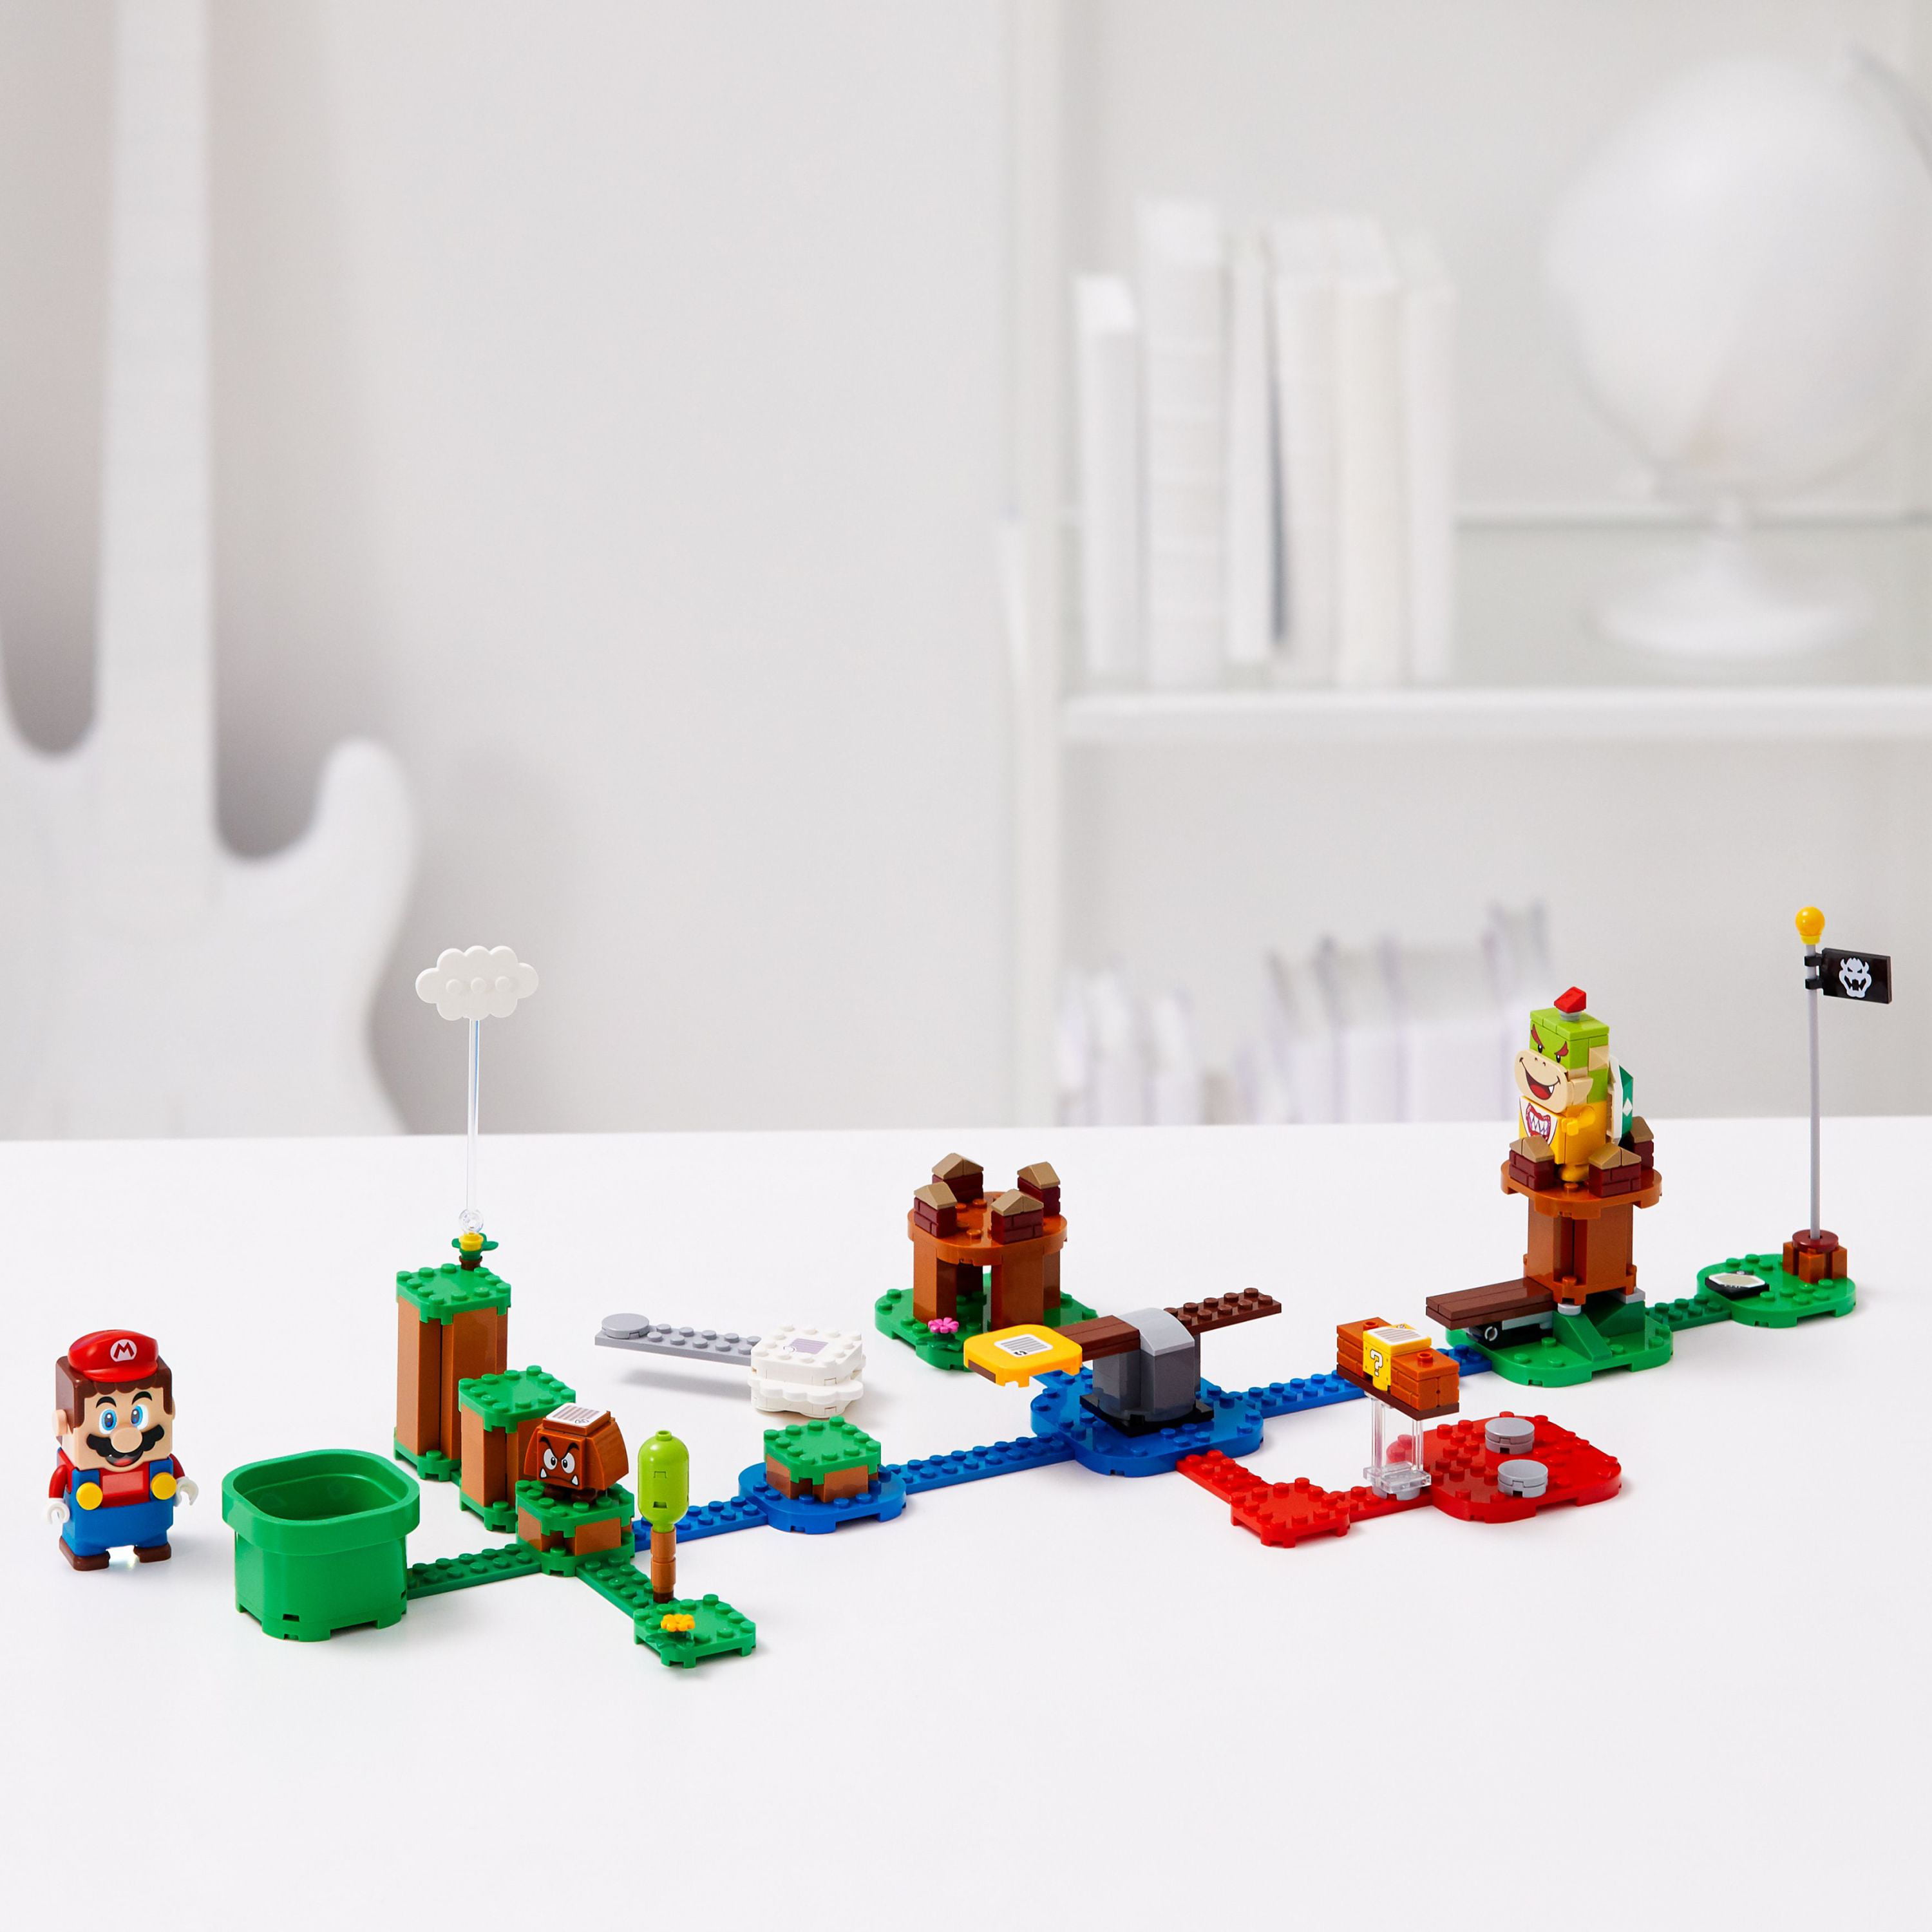 LEGO Super Mario Adventures Starter Course Set 71360, Buildable Toy Game, Birthday for Mario Bros. Fans and Kids 6 Plus Year Old with Interactive Figure and Bowser Jr. -